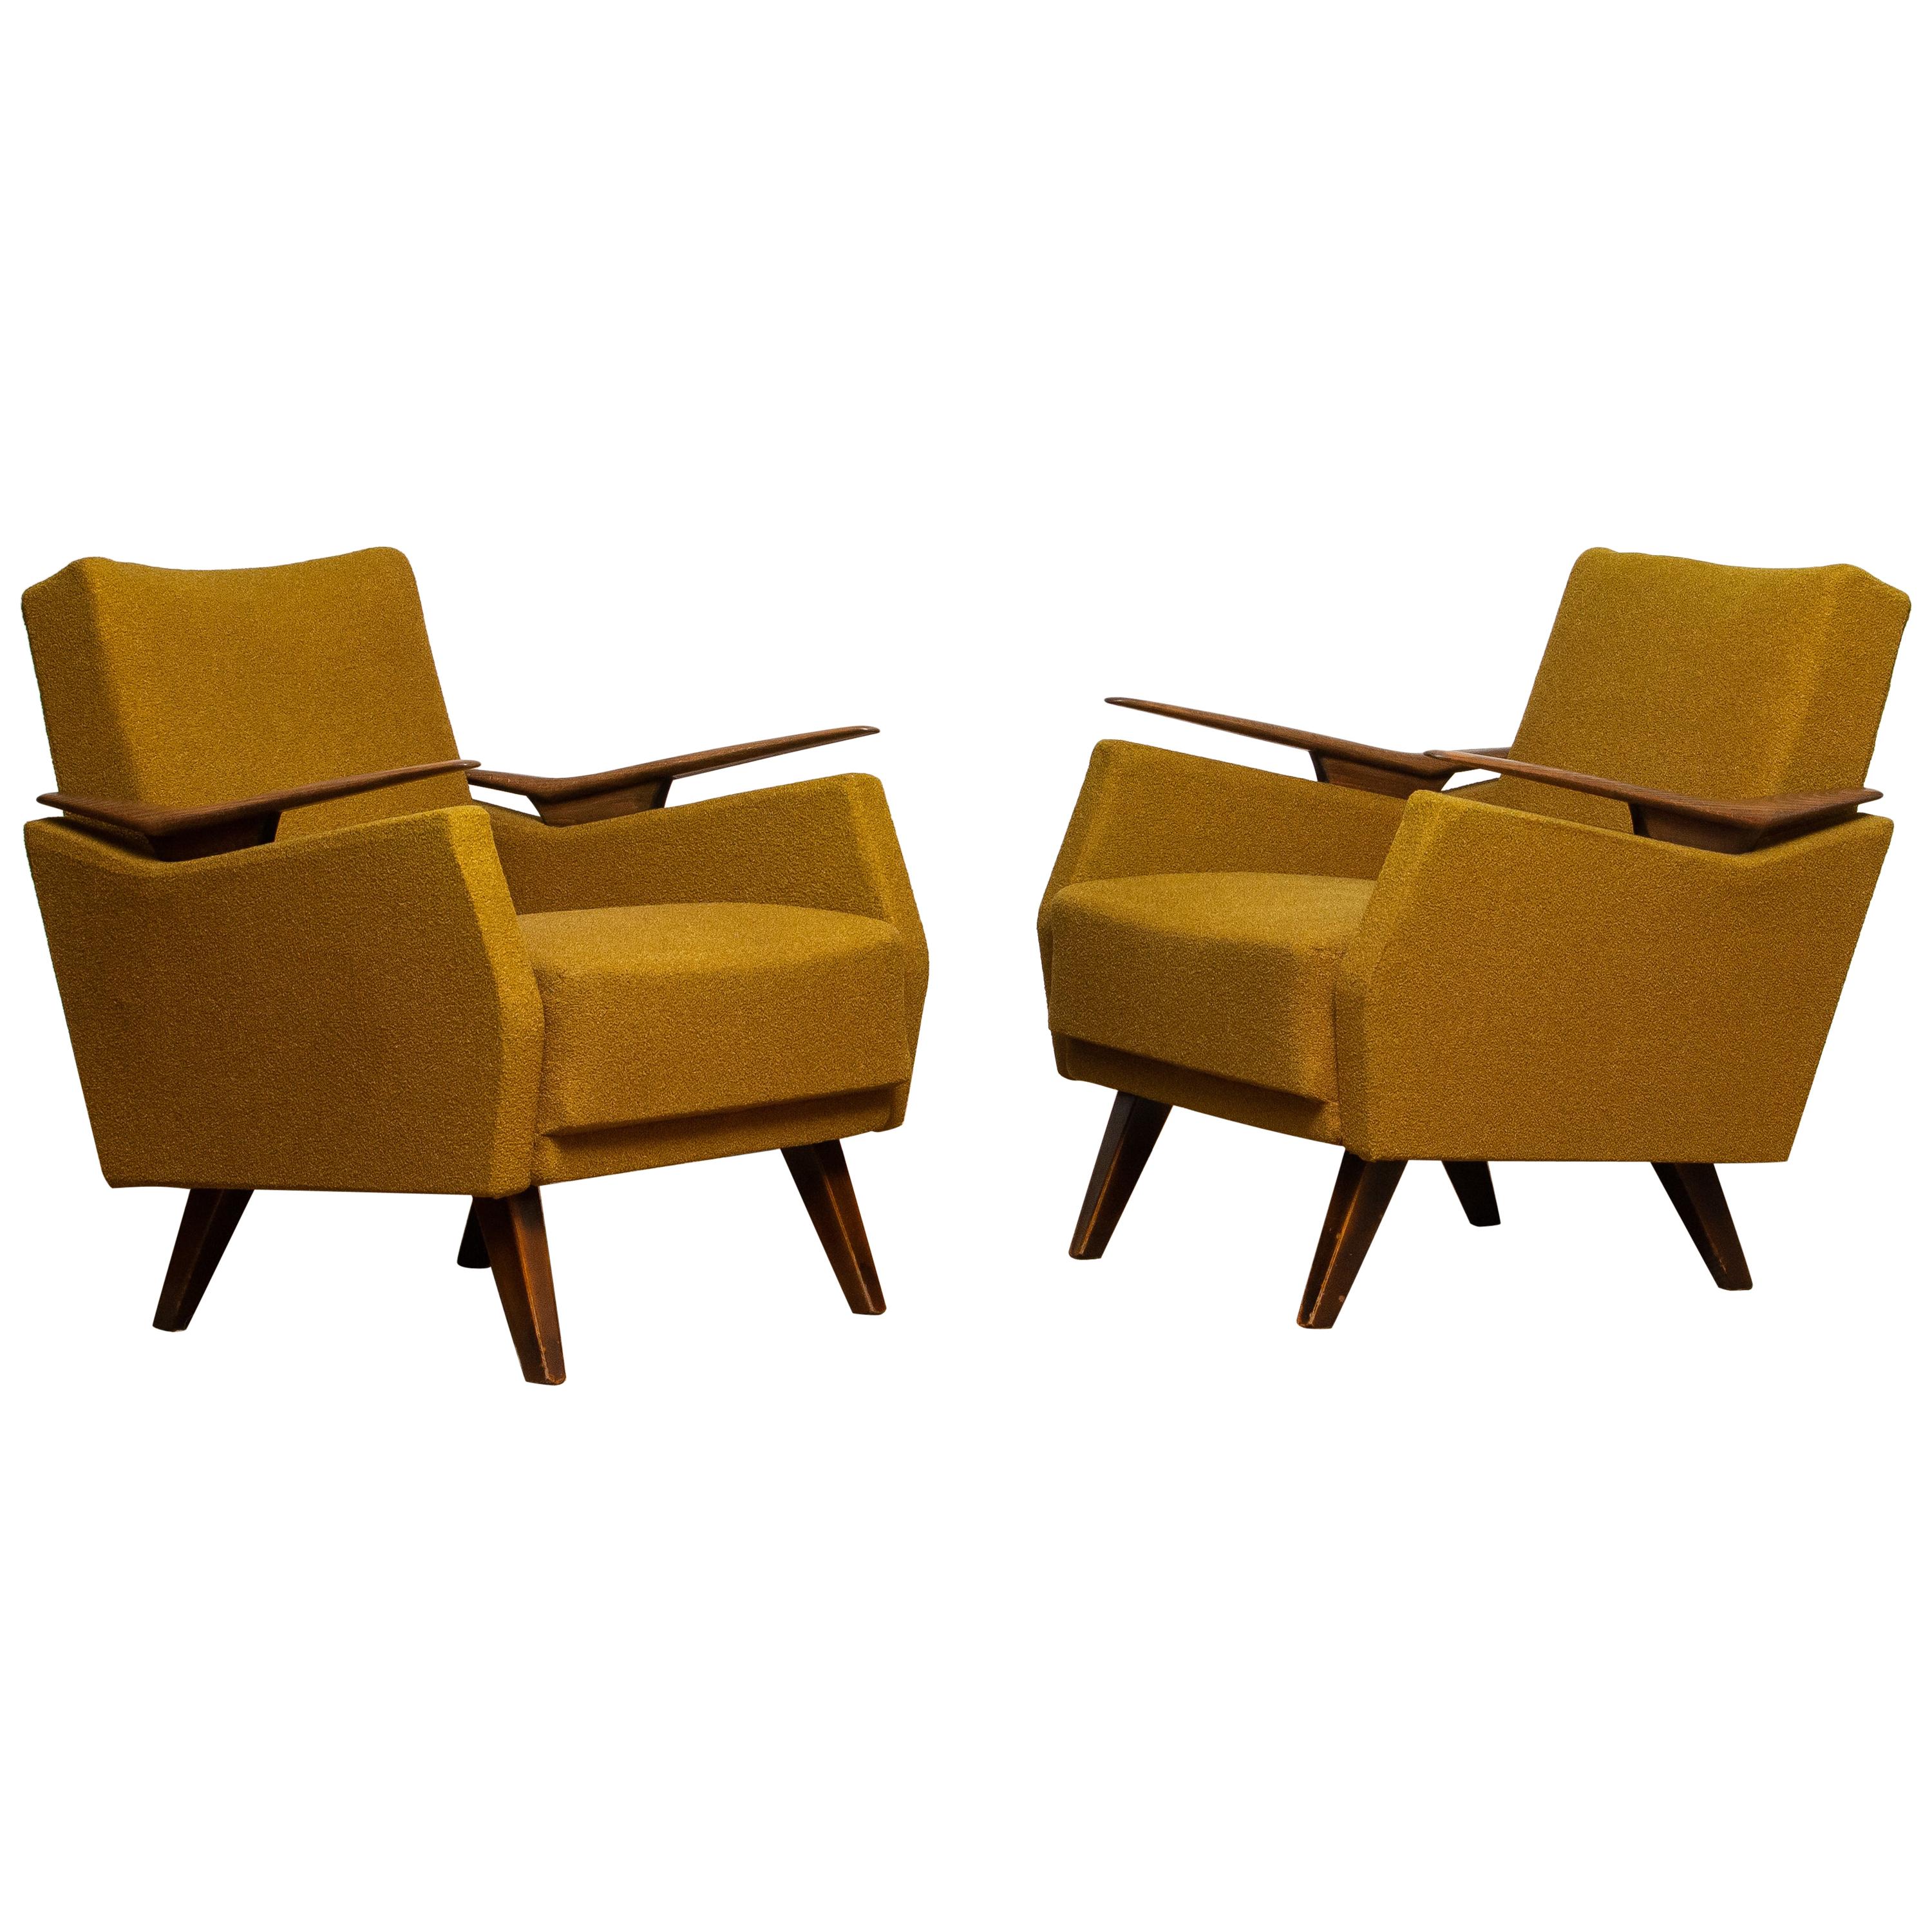 Beautiful and comfortable original set of two lounge / easy / club chairs from the '50s made in Germany. The chairs are upholstered with the original bouclé fabric which is still in good condition. The overall condition of both chairs is also